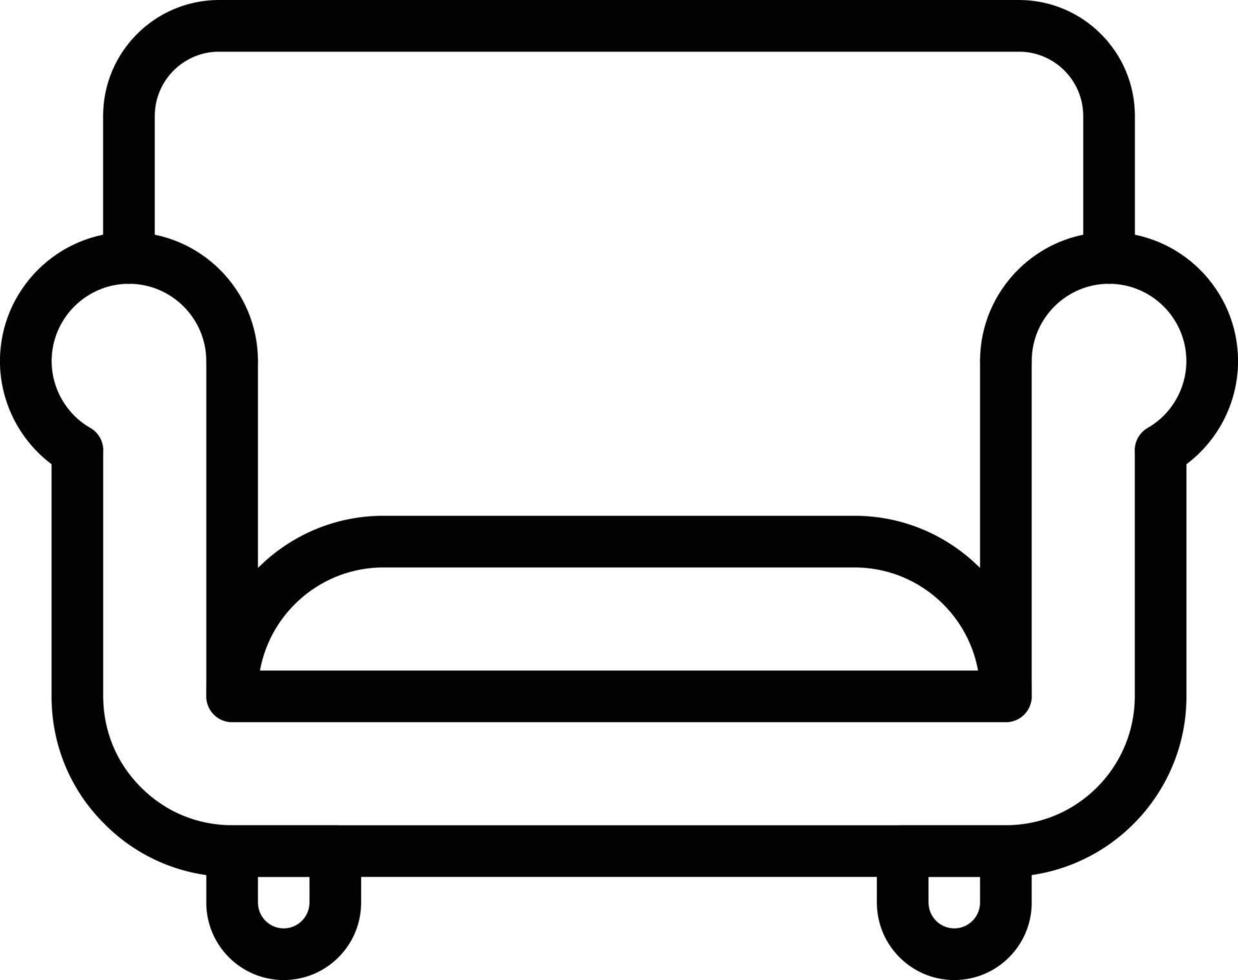 sofa vector illustration on a background.Premium quality symbols.vector icons for concept and graphic design.